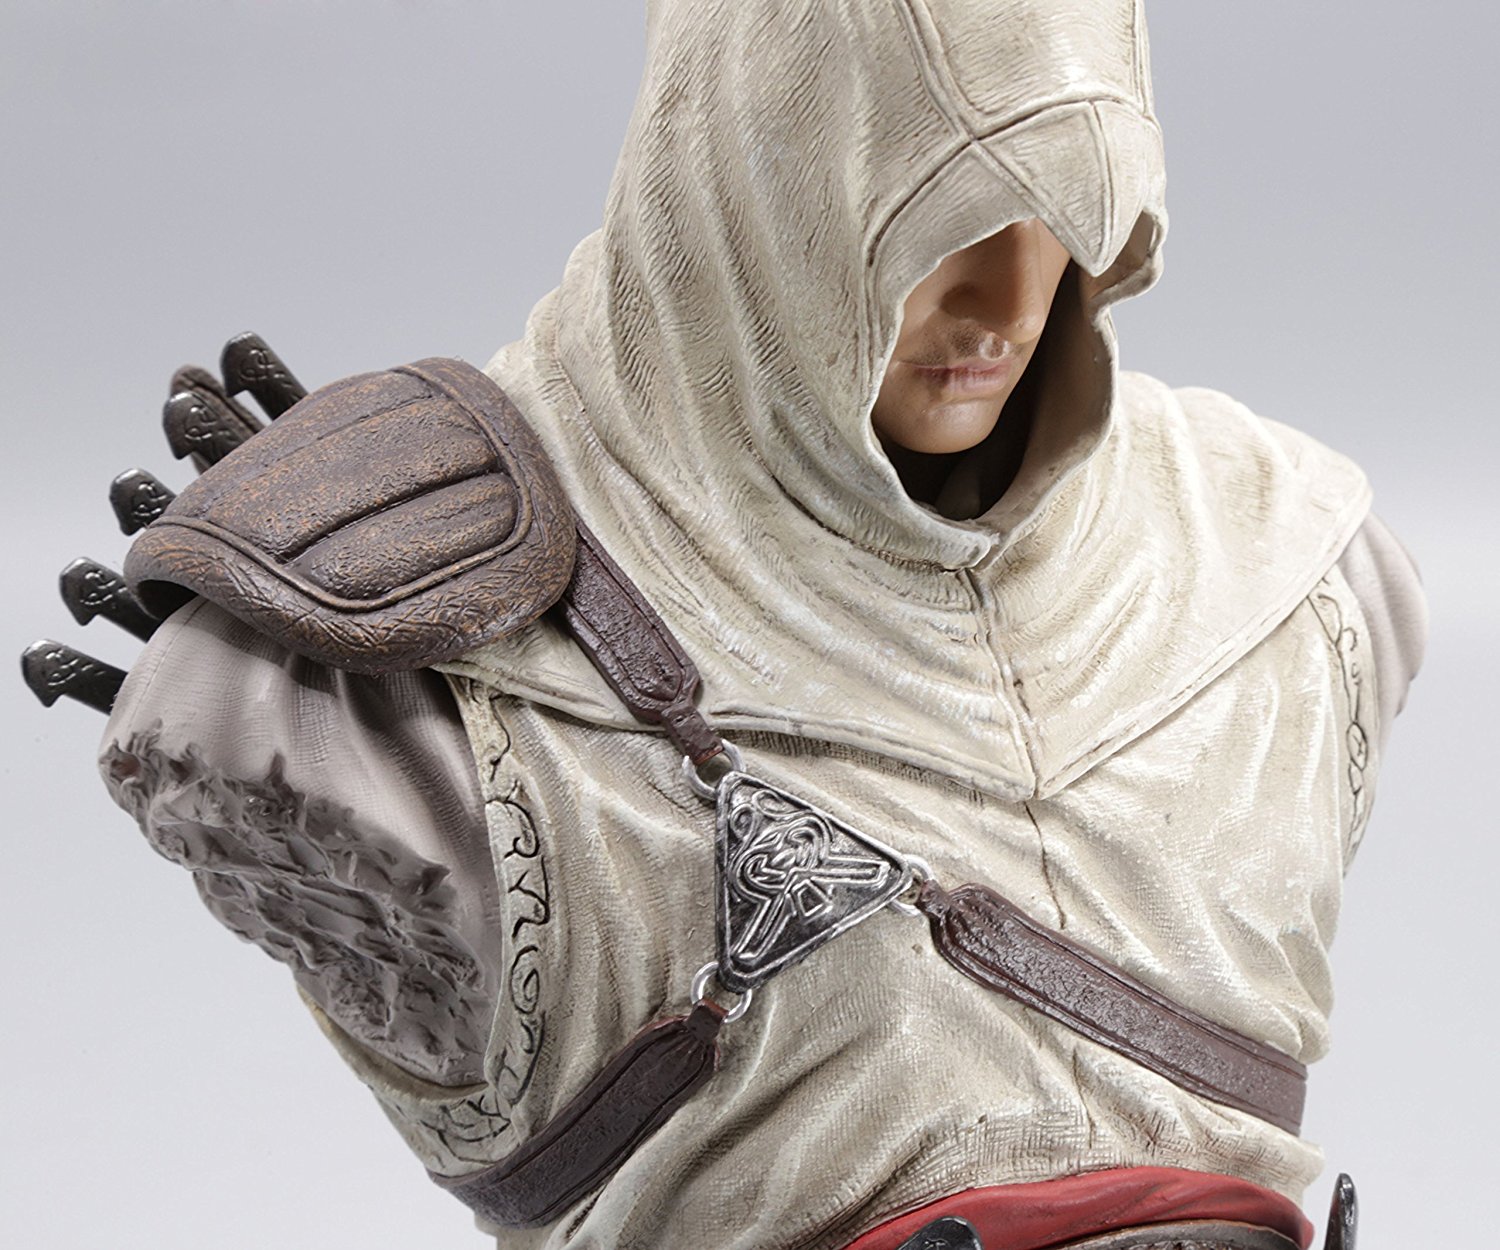 Altair action Figures